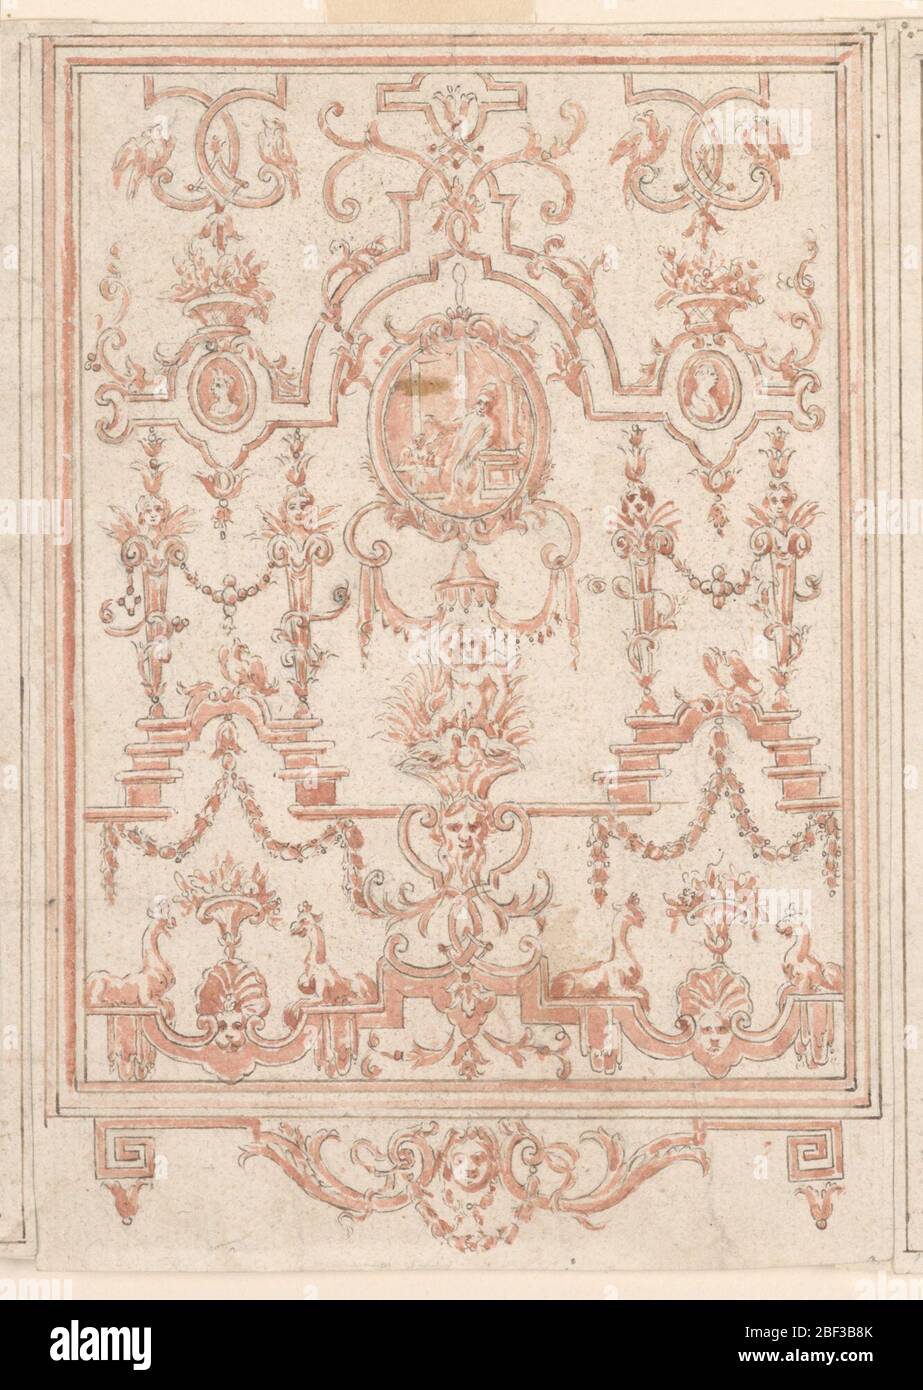 Design for Grotesque Panel. Design for panel with grotesques. At center, three medallions, the largest at center. Moulded oblong frame with a bottom ornament. Grotesques in the style of Bérain. Stock Photo